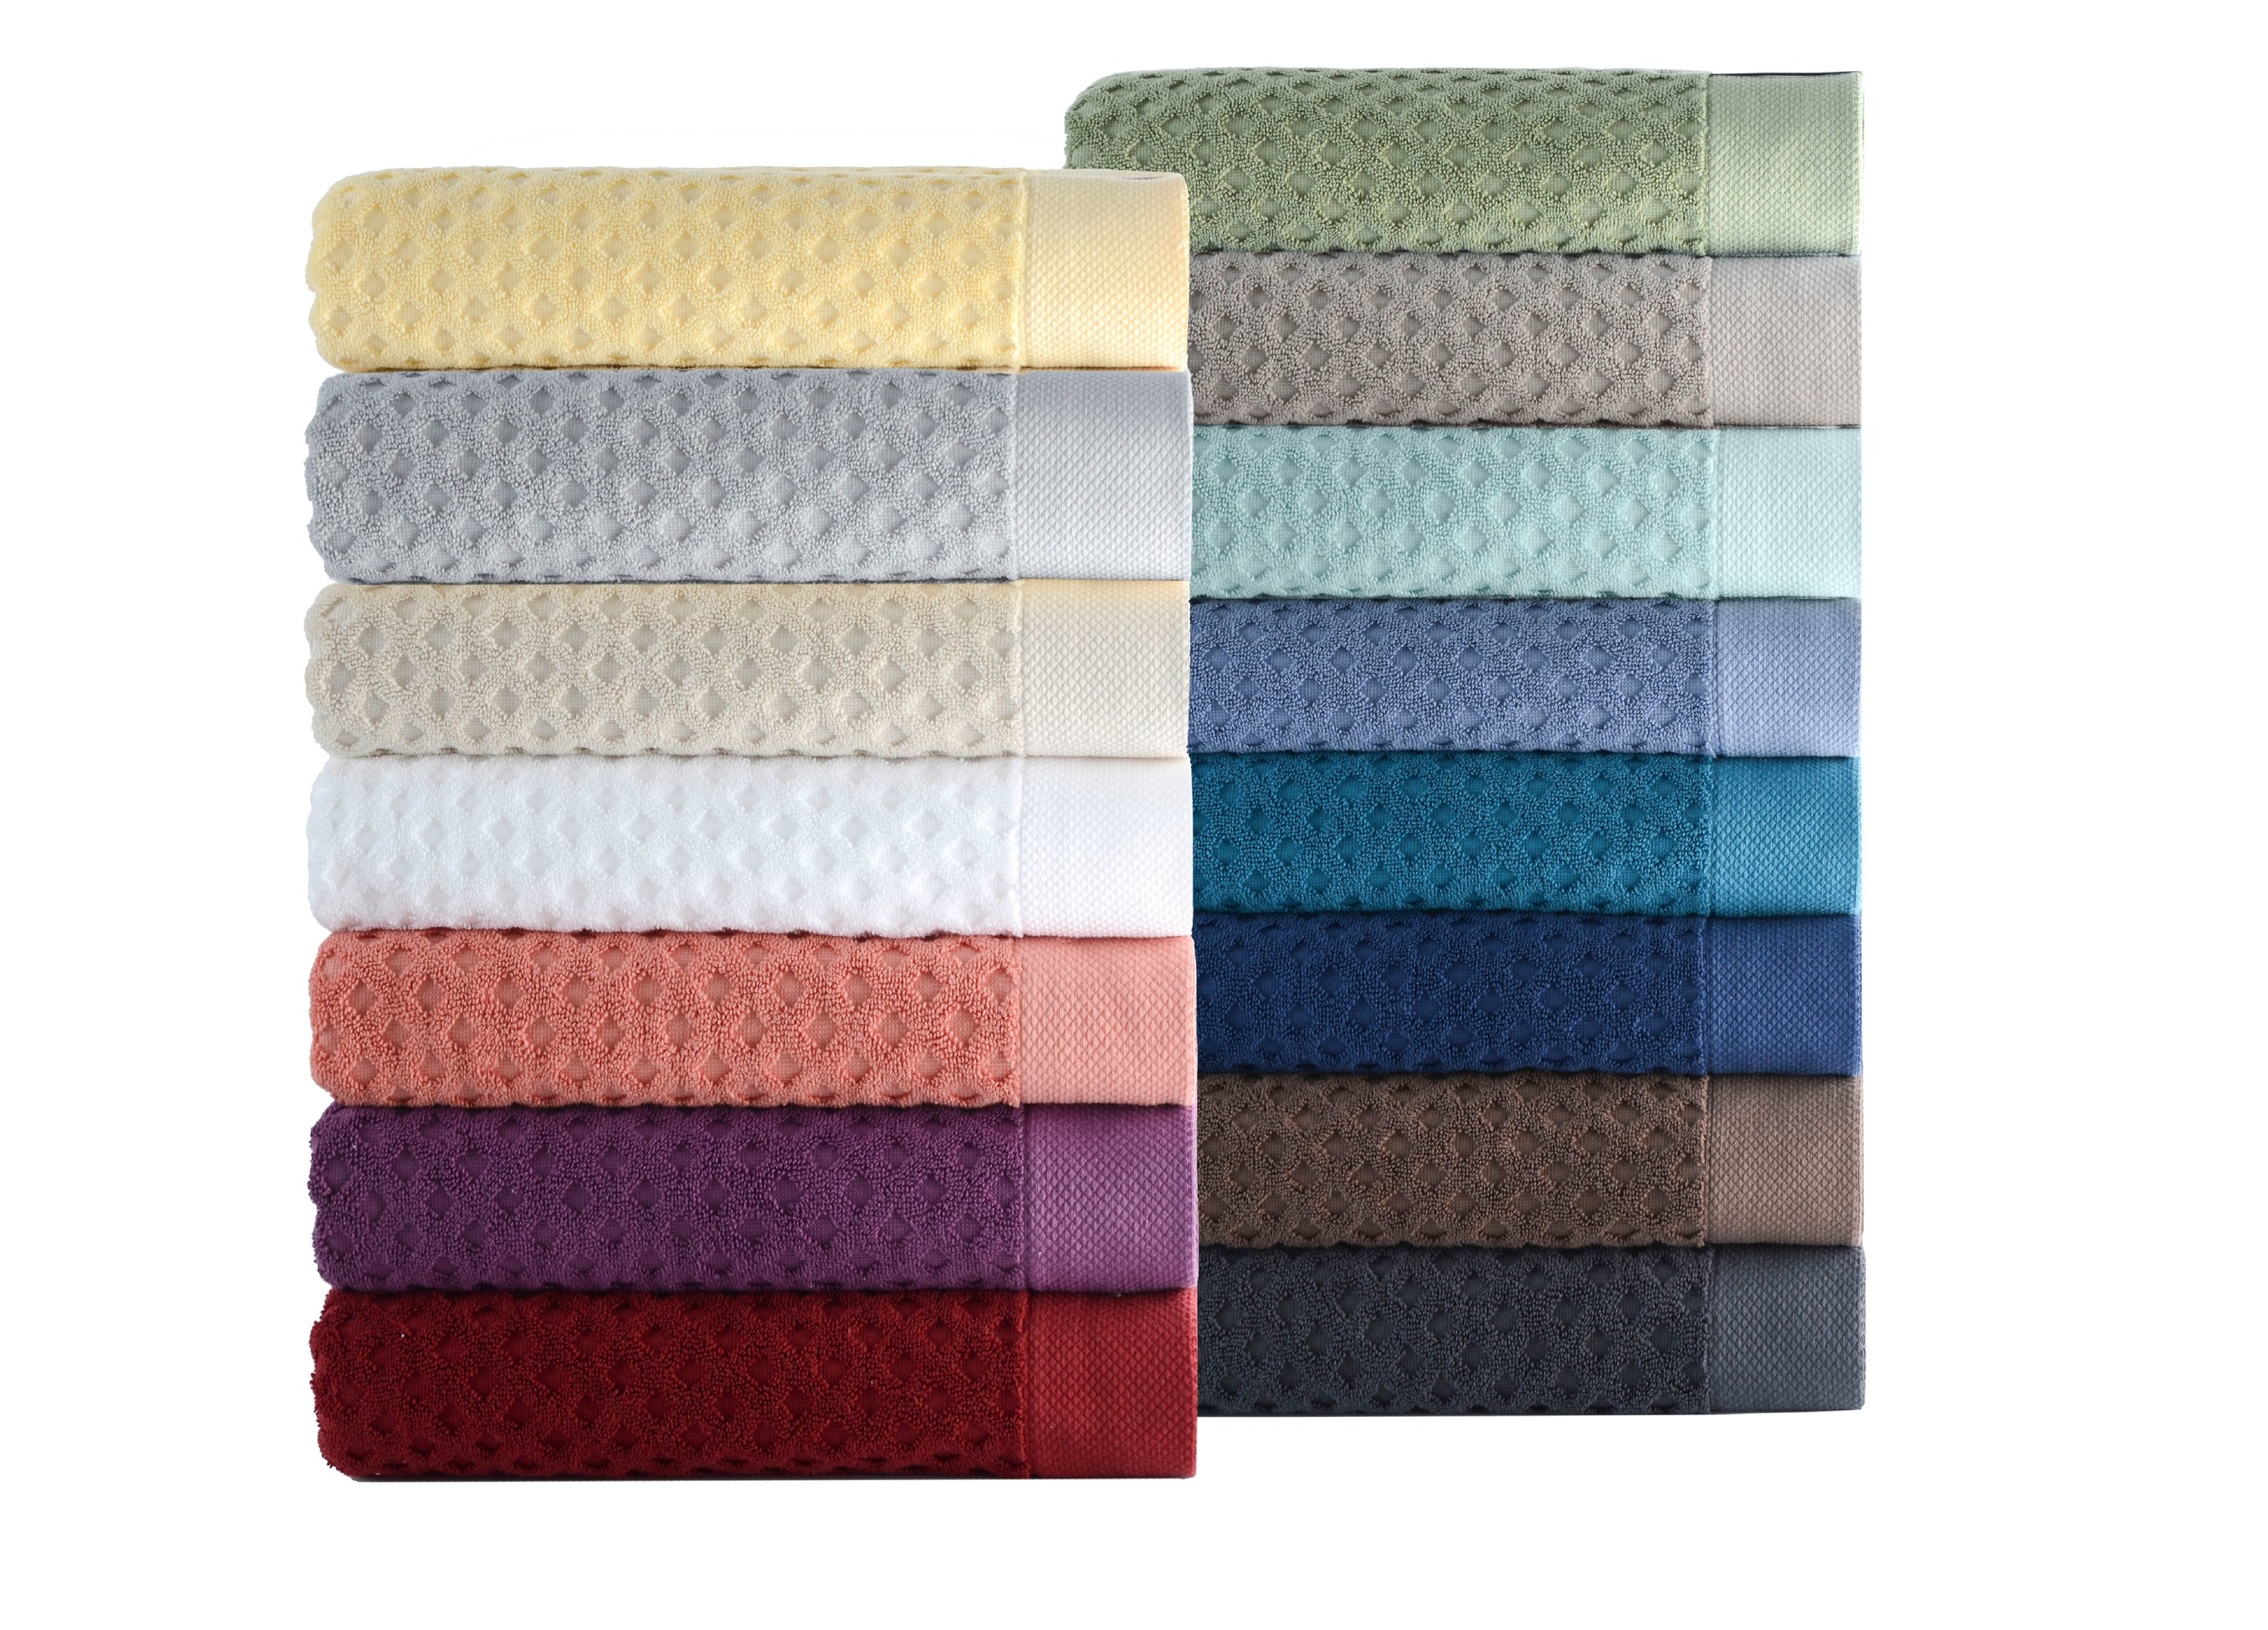 A multicolored stack of towels